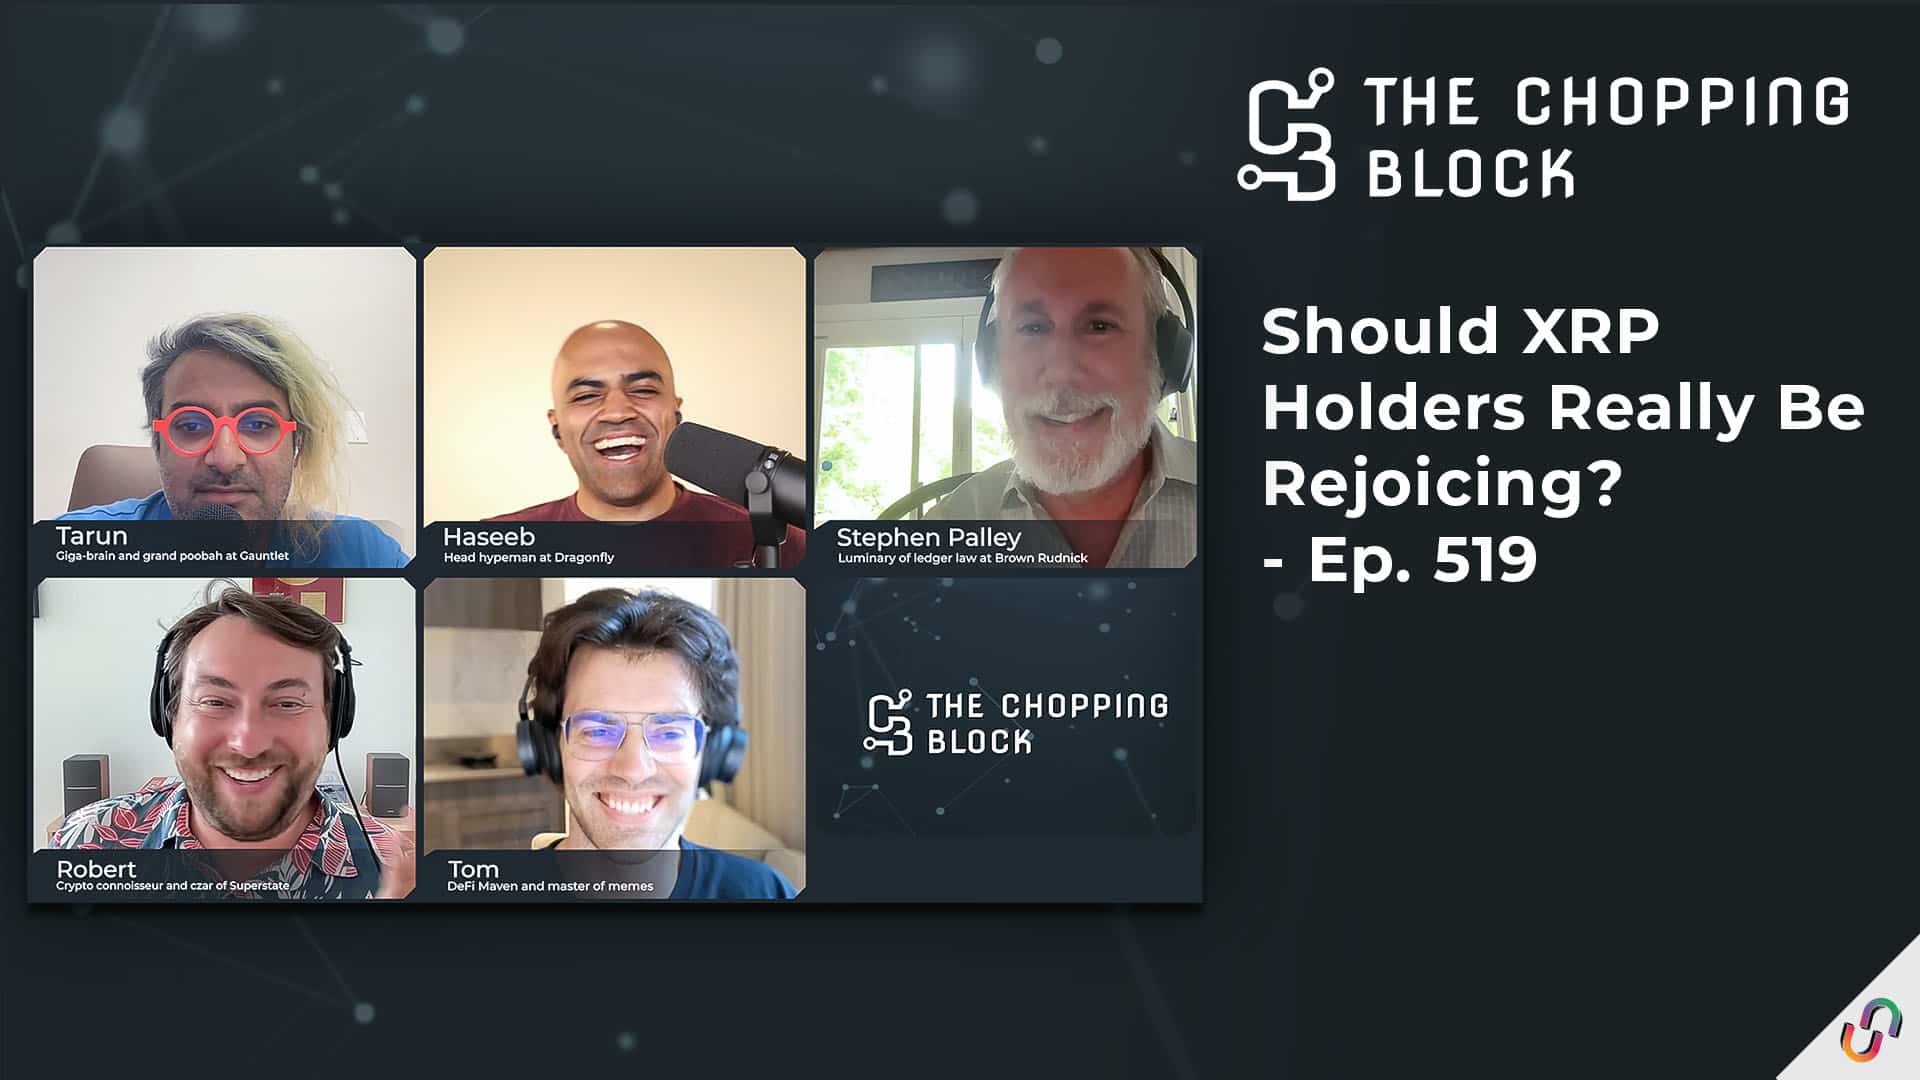 The Chopping Block: Should XRP Holders Really Be Rejoicing? - Ep. 519